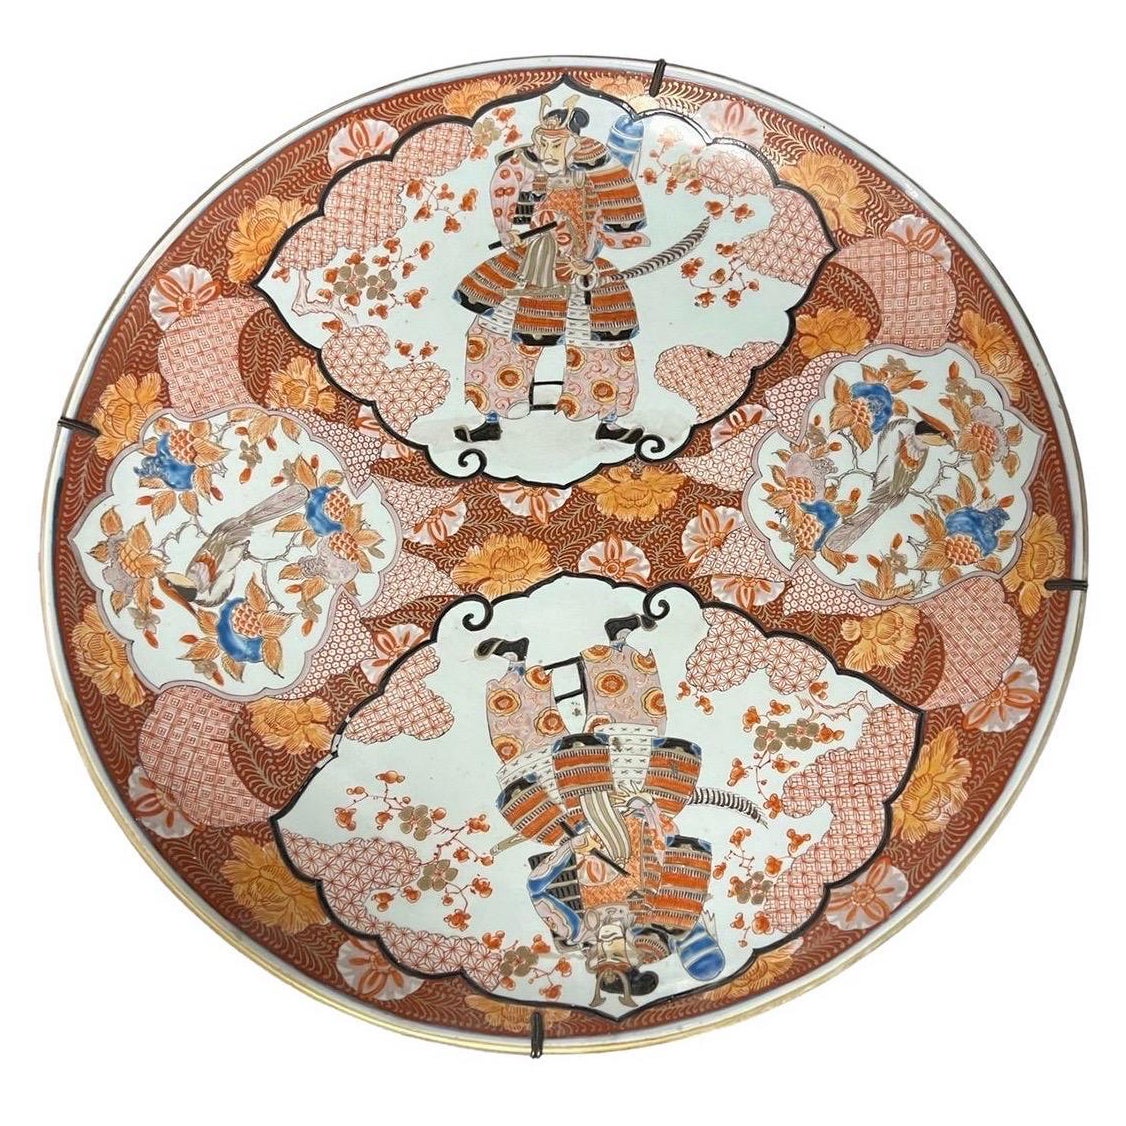 Early 20th Century Meiji Period Japanese Samurai Enamel Decorated Charger